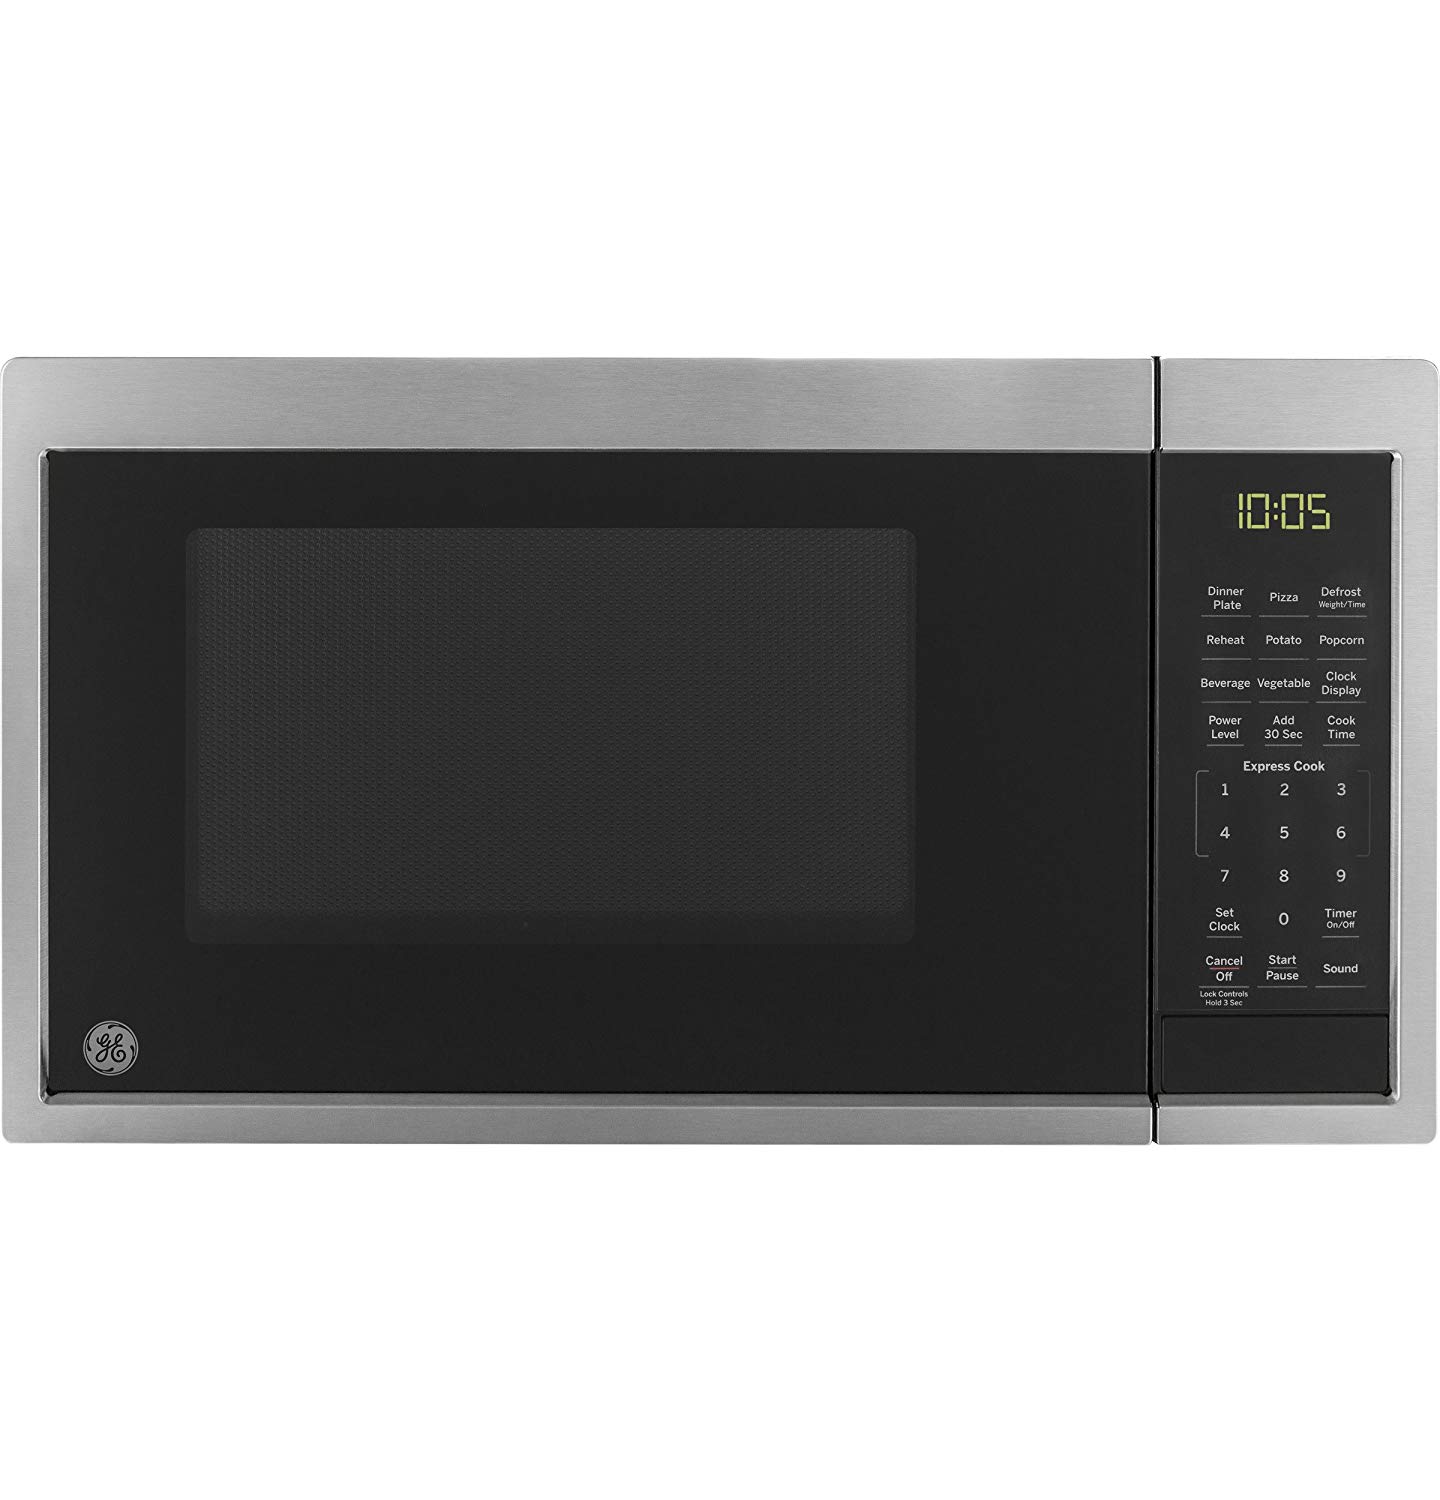 GE JES1095SMSS Microwave Oven Stainless Steel